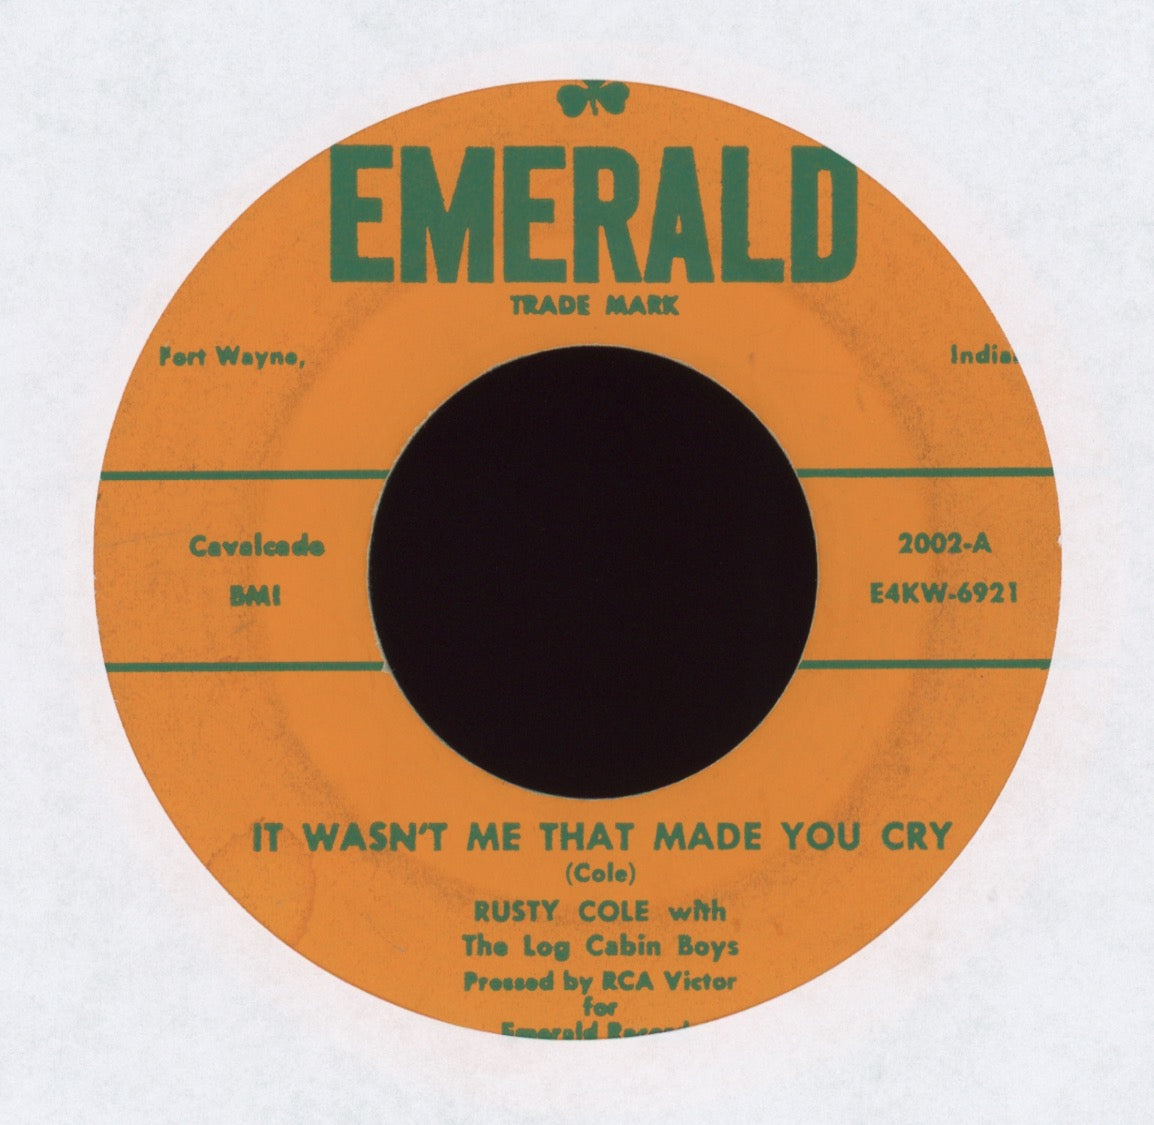 Rusty Cole - It Wasn't Me That Made You Cry on Emerald